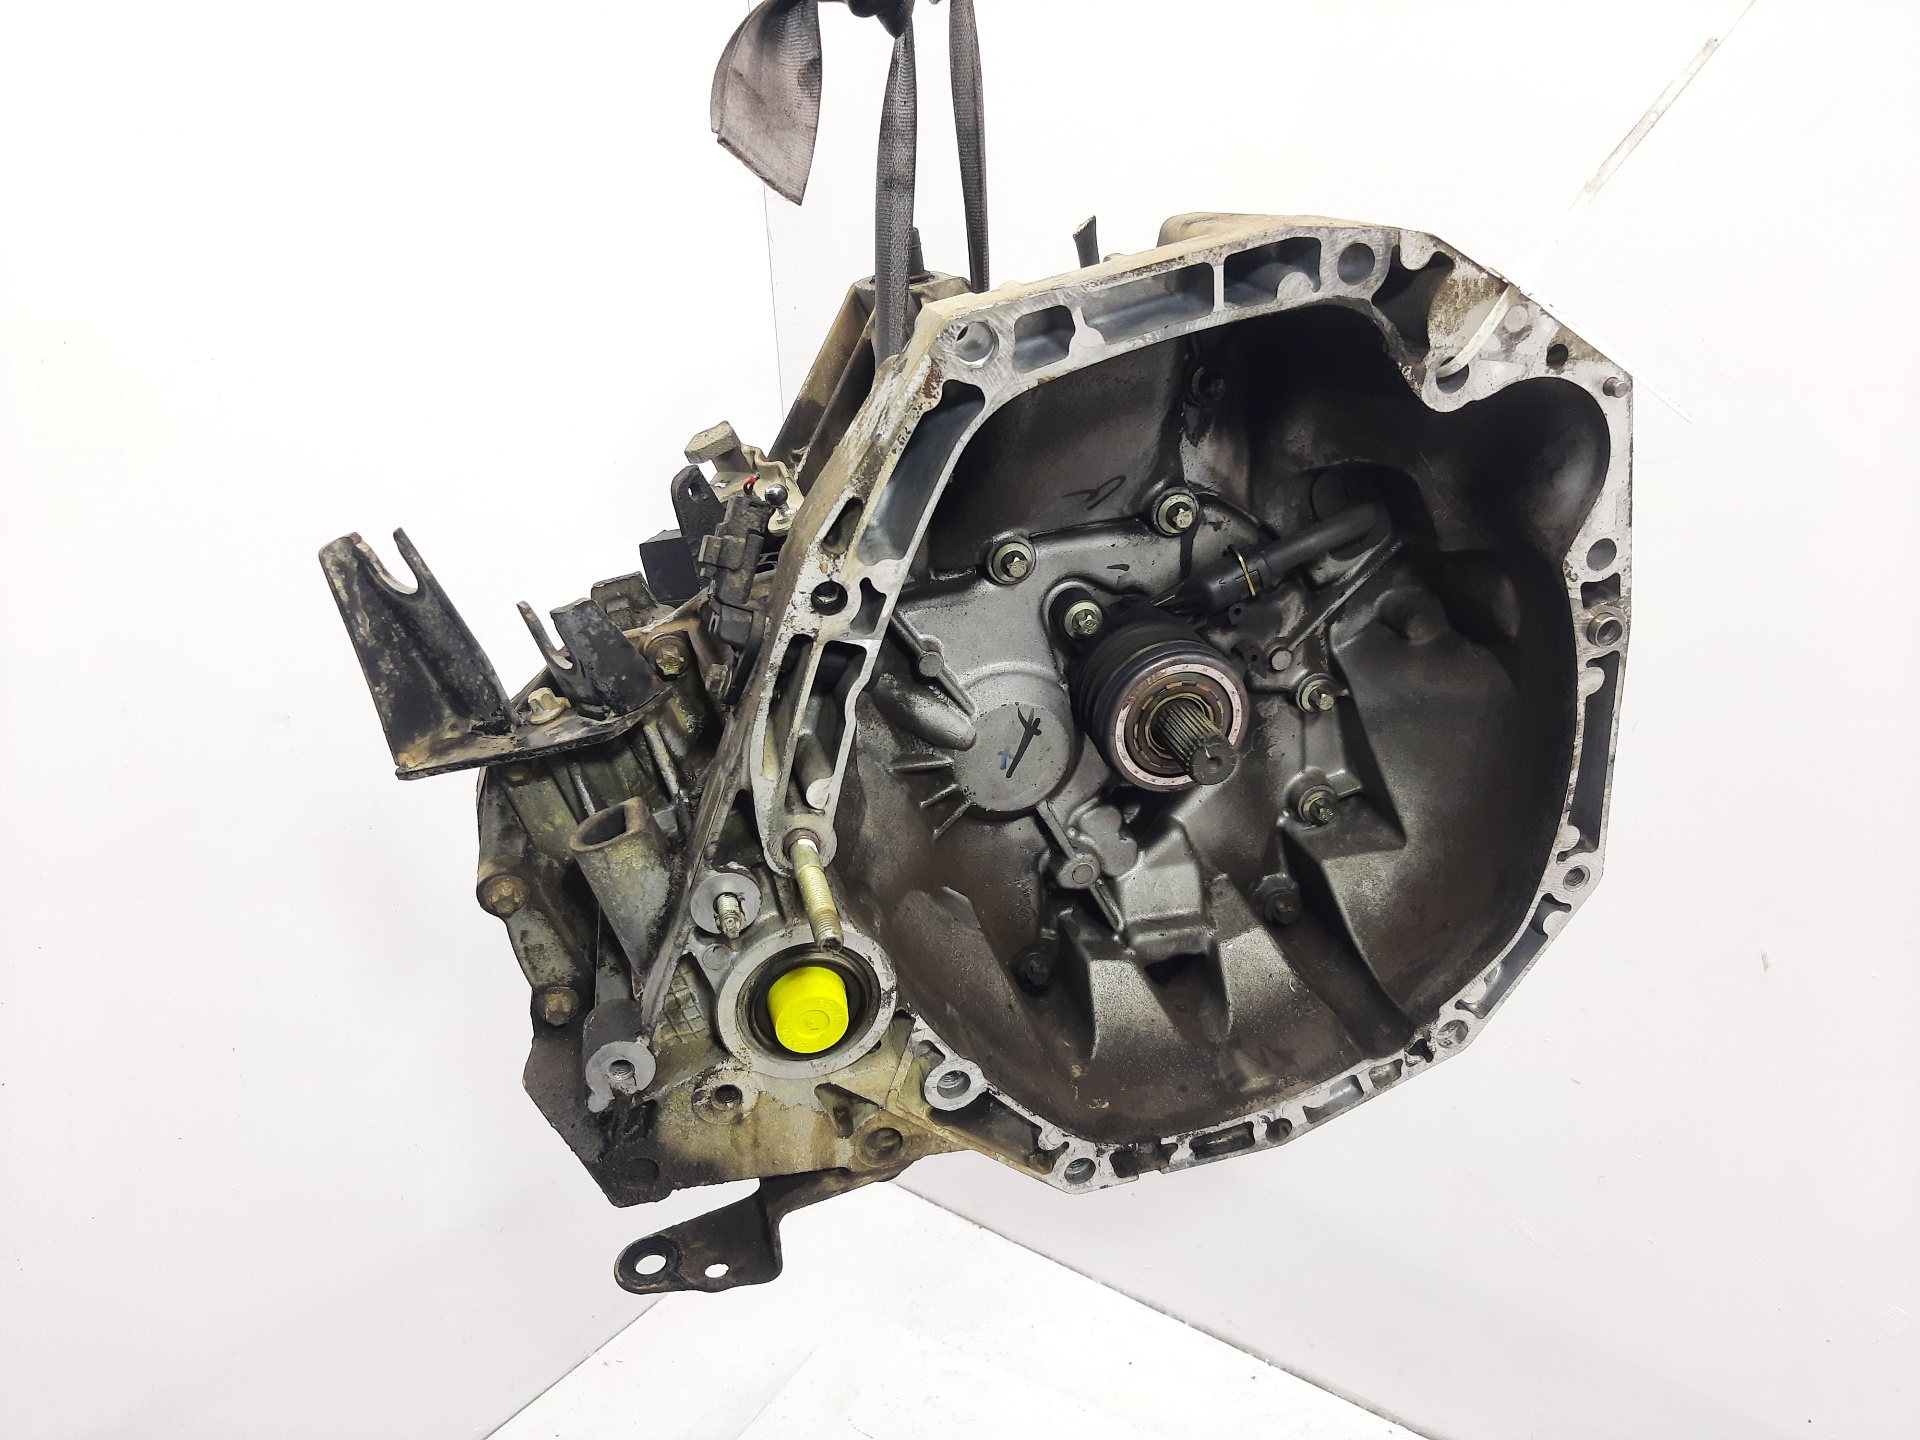 NISSAN Micra K12 (2002-2010) Gearbox JH3158, 5VELOCIDADES 24772171